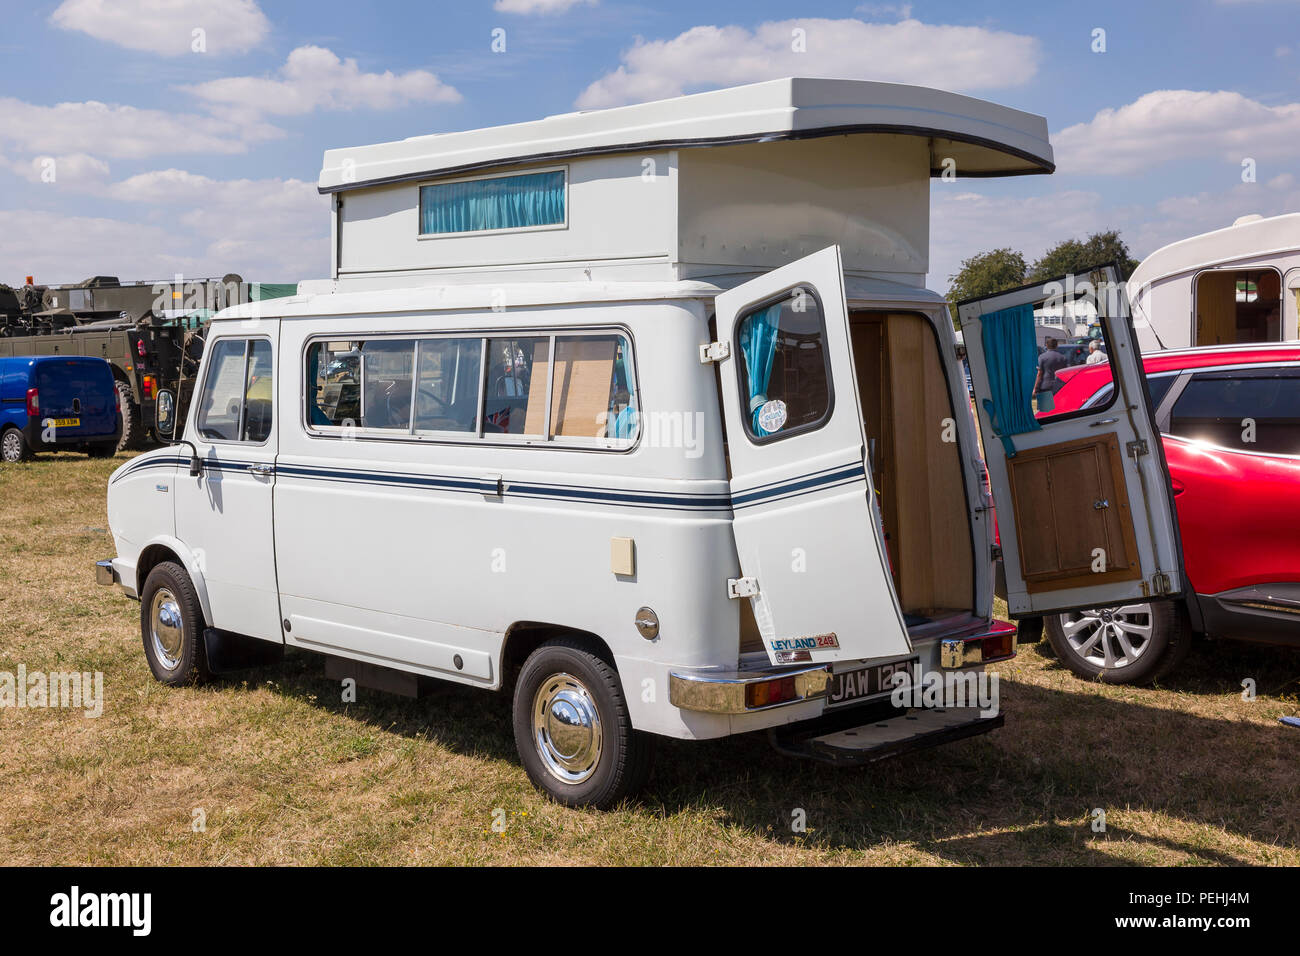 Pop-up roof extension in British Leyland Sherpa Autosleeper motor caravan at an English show in 2018 Stock Photo